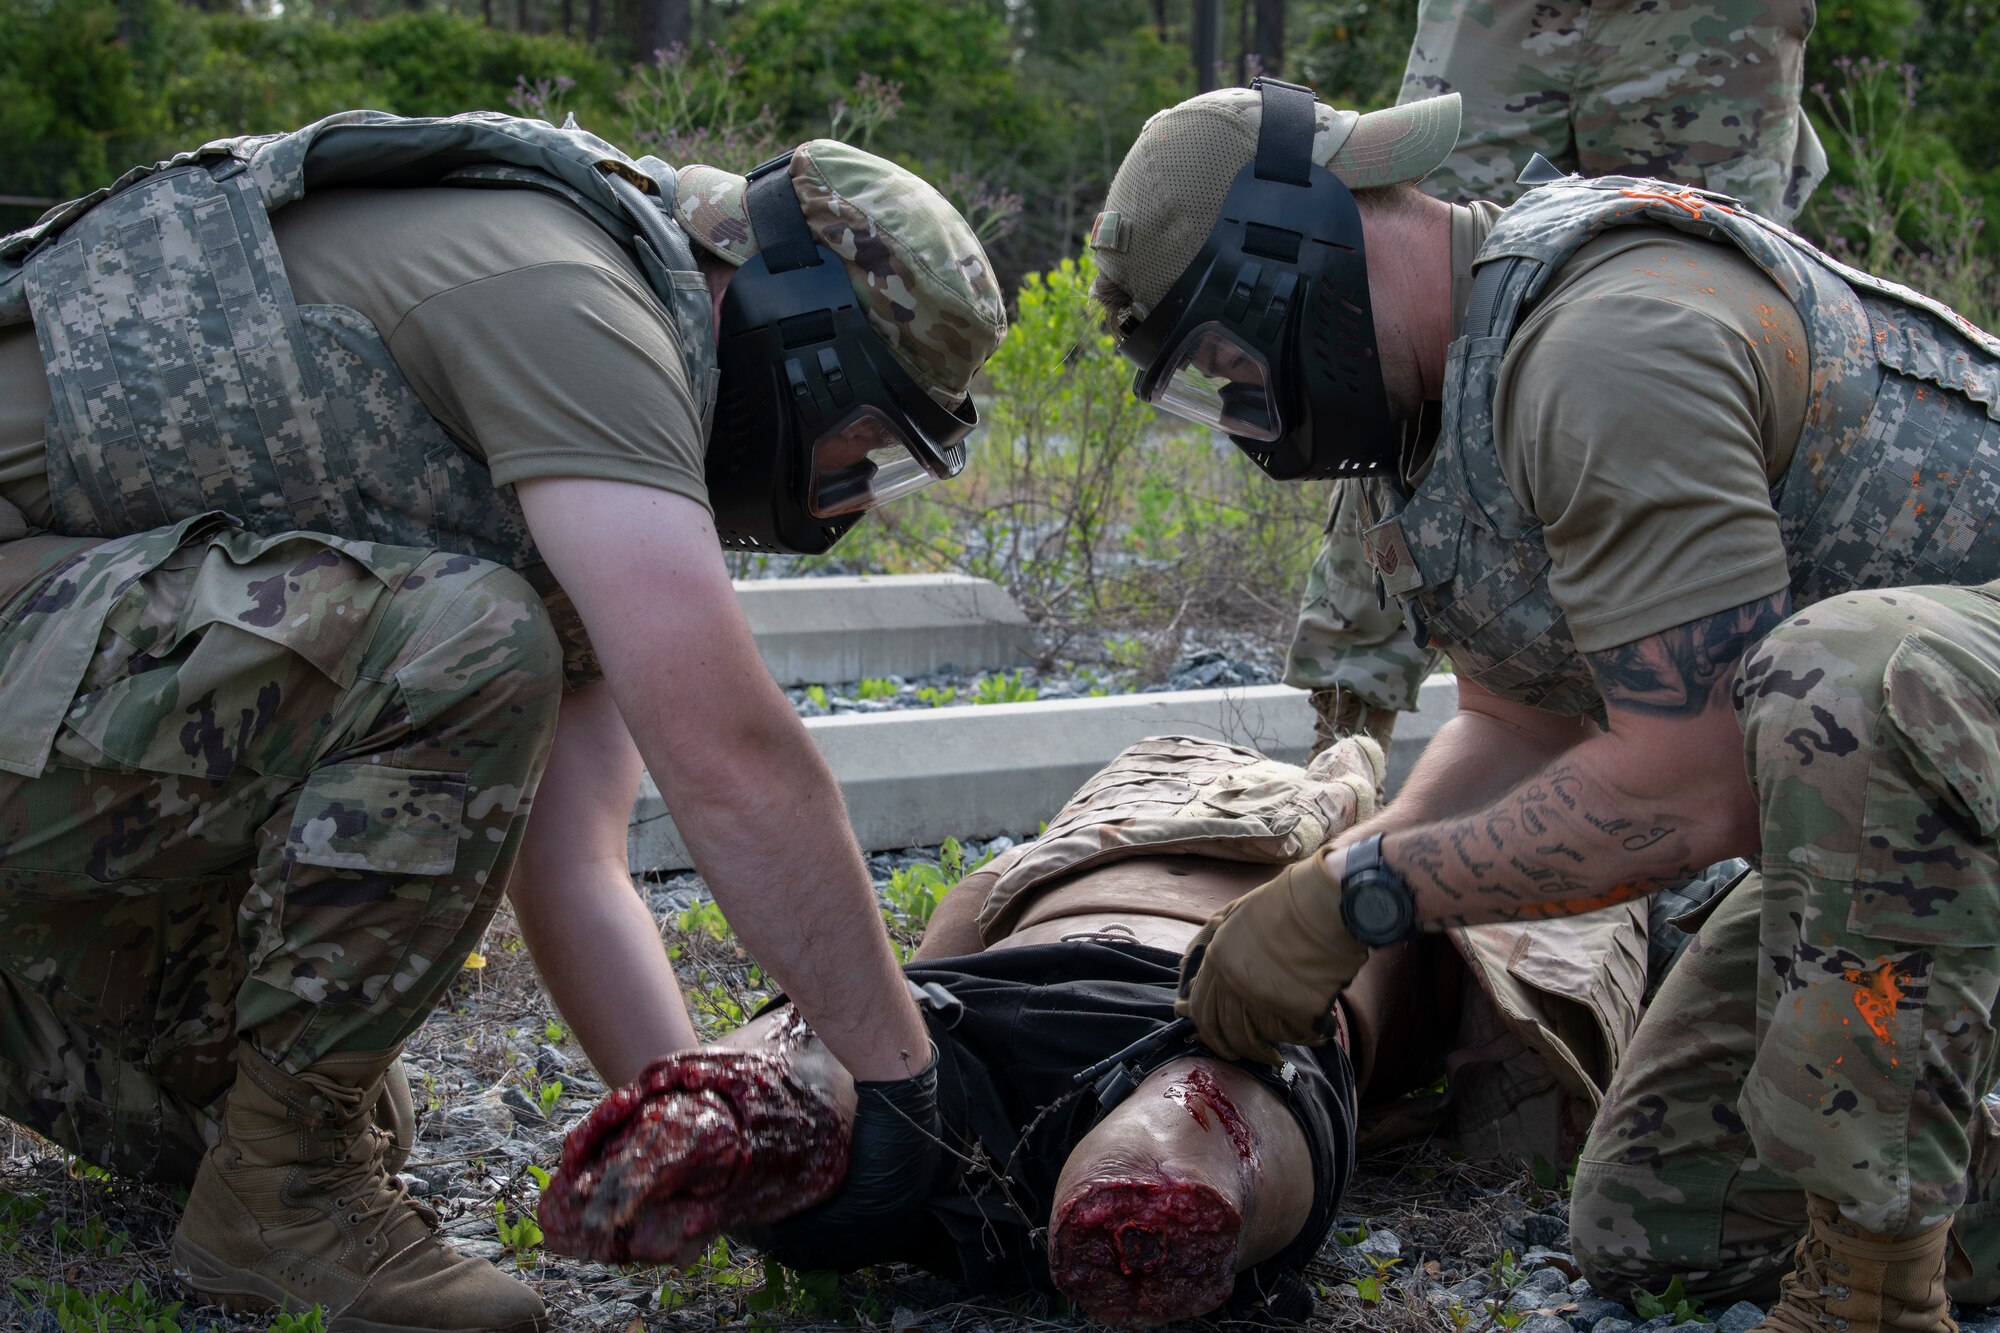 U.S. Air Force Staff Sgt. Austin Yentes, the 1st Special Operations Healthcare Operations Squadron information systems NCOIC, left, and U.S. Air Force Staff Sgt. Randal Marks, the 1st SOHCOS hematology NCOIC, right, provide medical care for a SIM Manikin during a tactical combat casualty care training April 29, 2022, at Hurlburt Field, Florida.